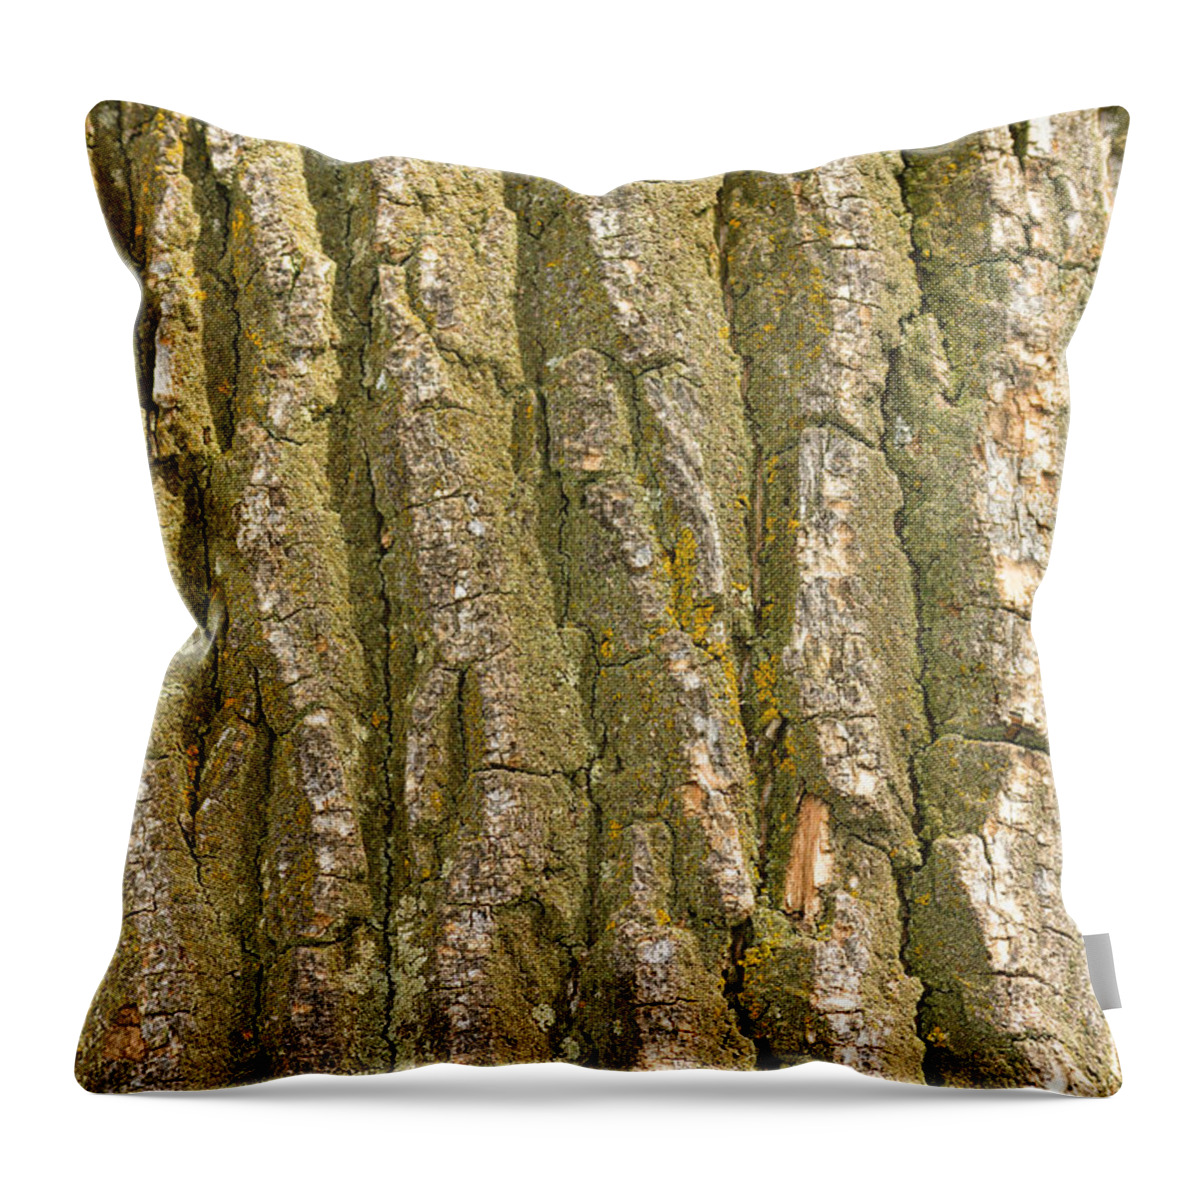 Cottonwood Throw Pillow featuring the photograph Cottonwood Tree Bark Texture by James BO Insogna